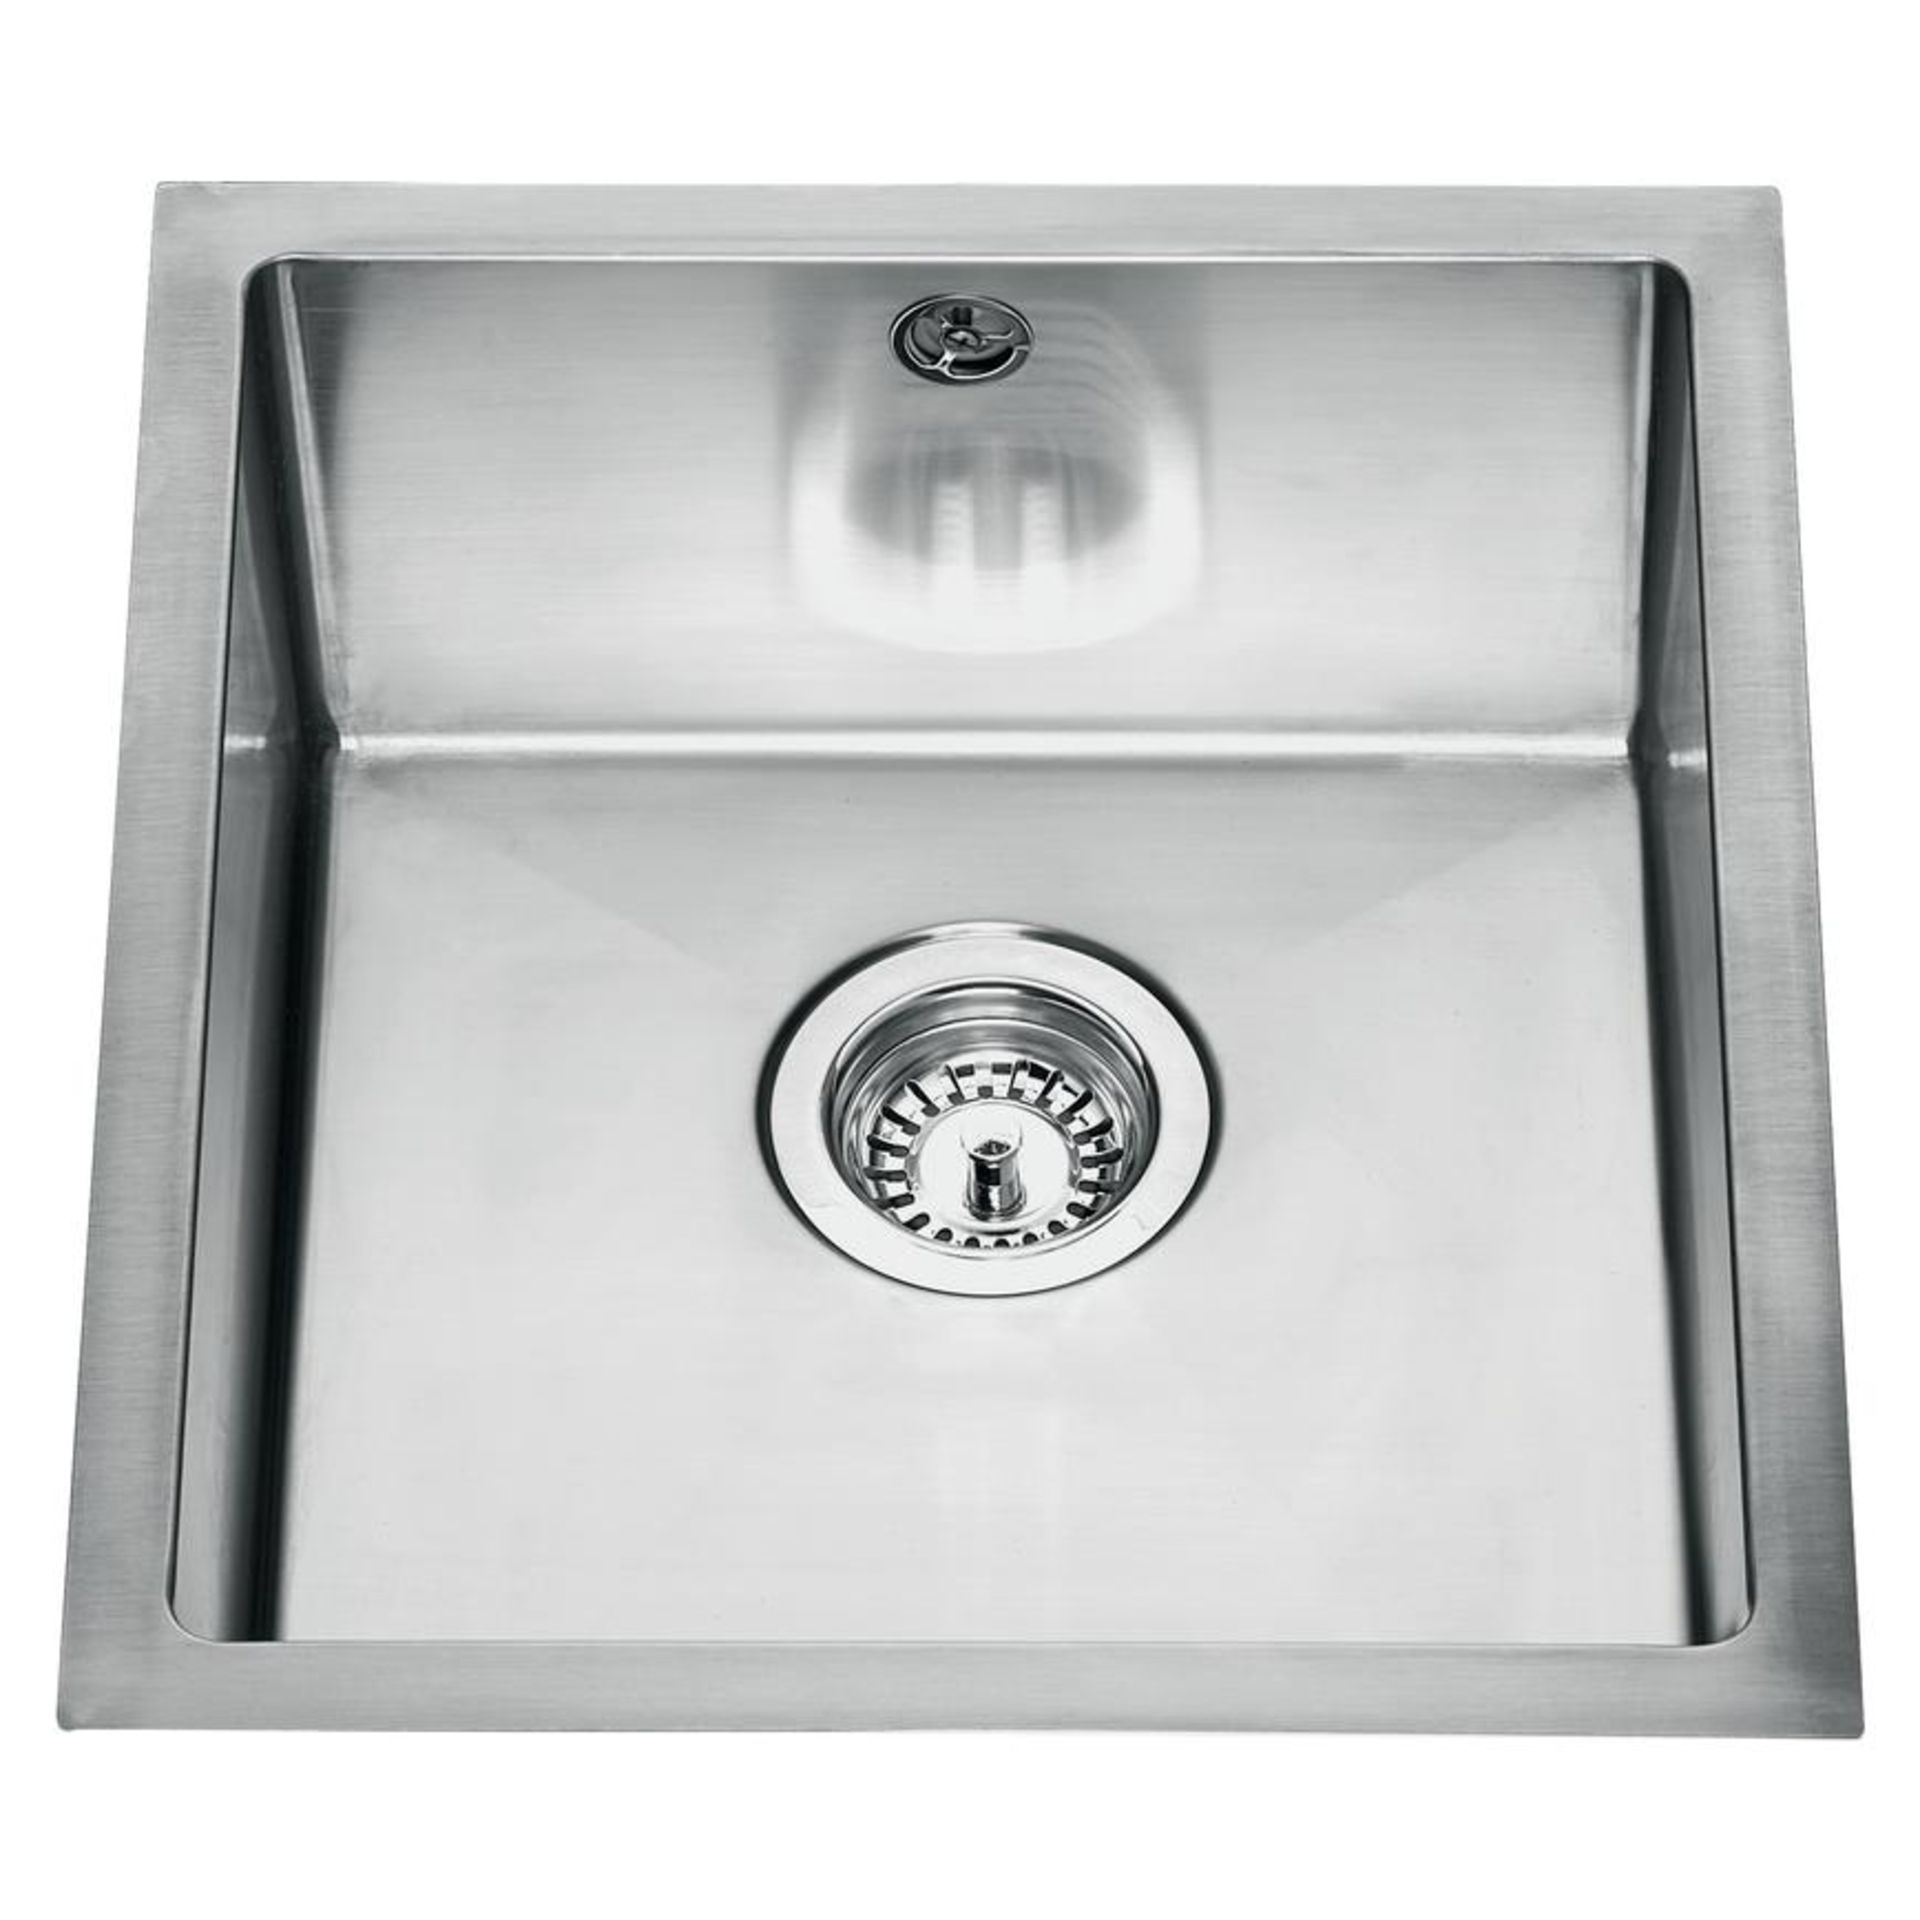 NEW 10 X Lamona Easton Single Bowl Inset/Undermount Stainless Steel Kitchen Sink. You can inset or